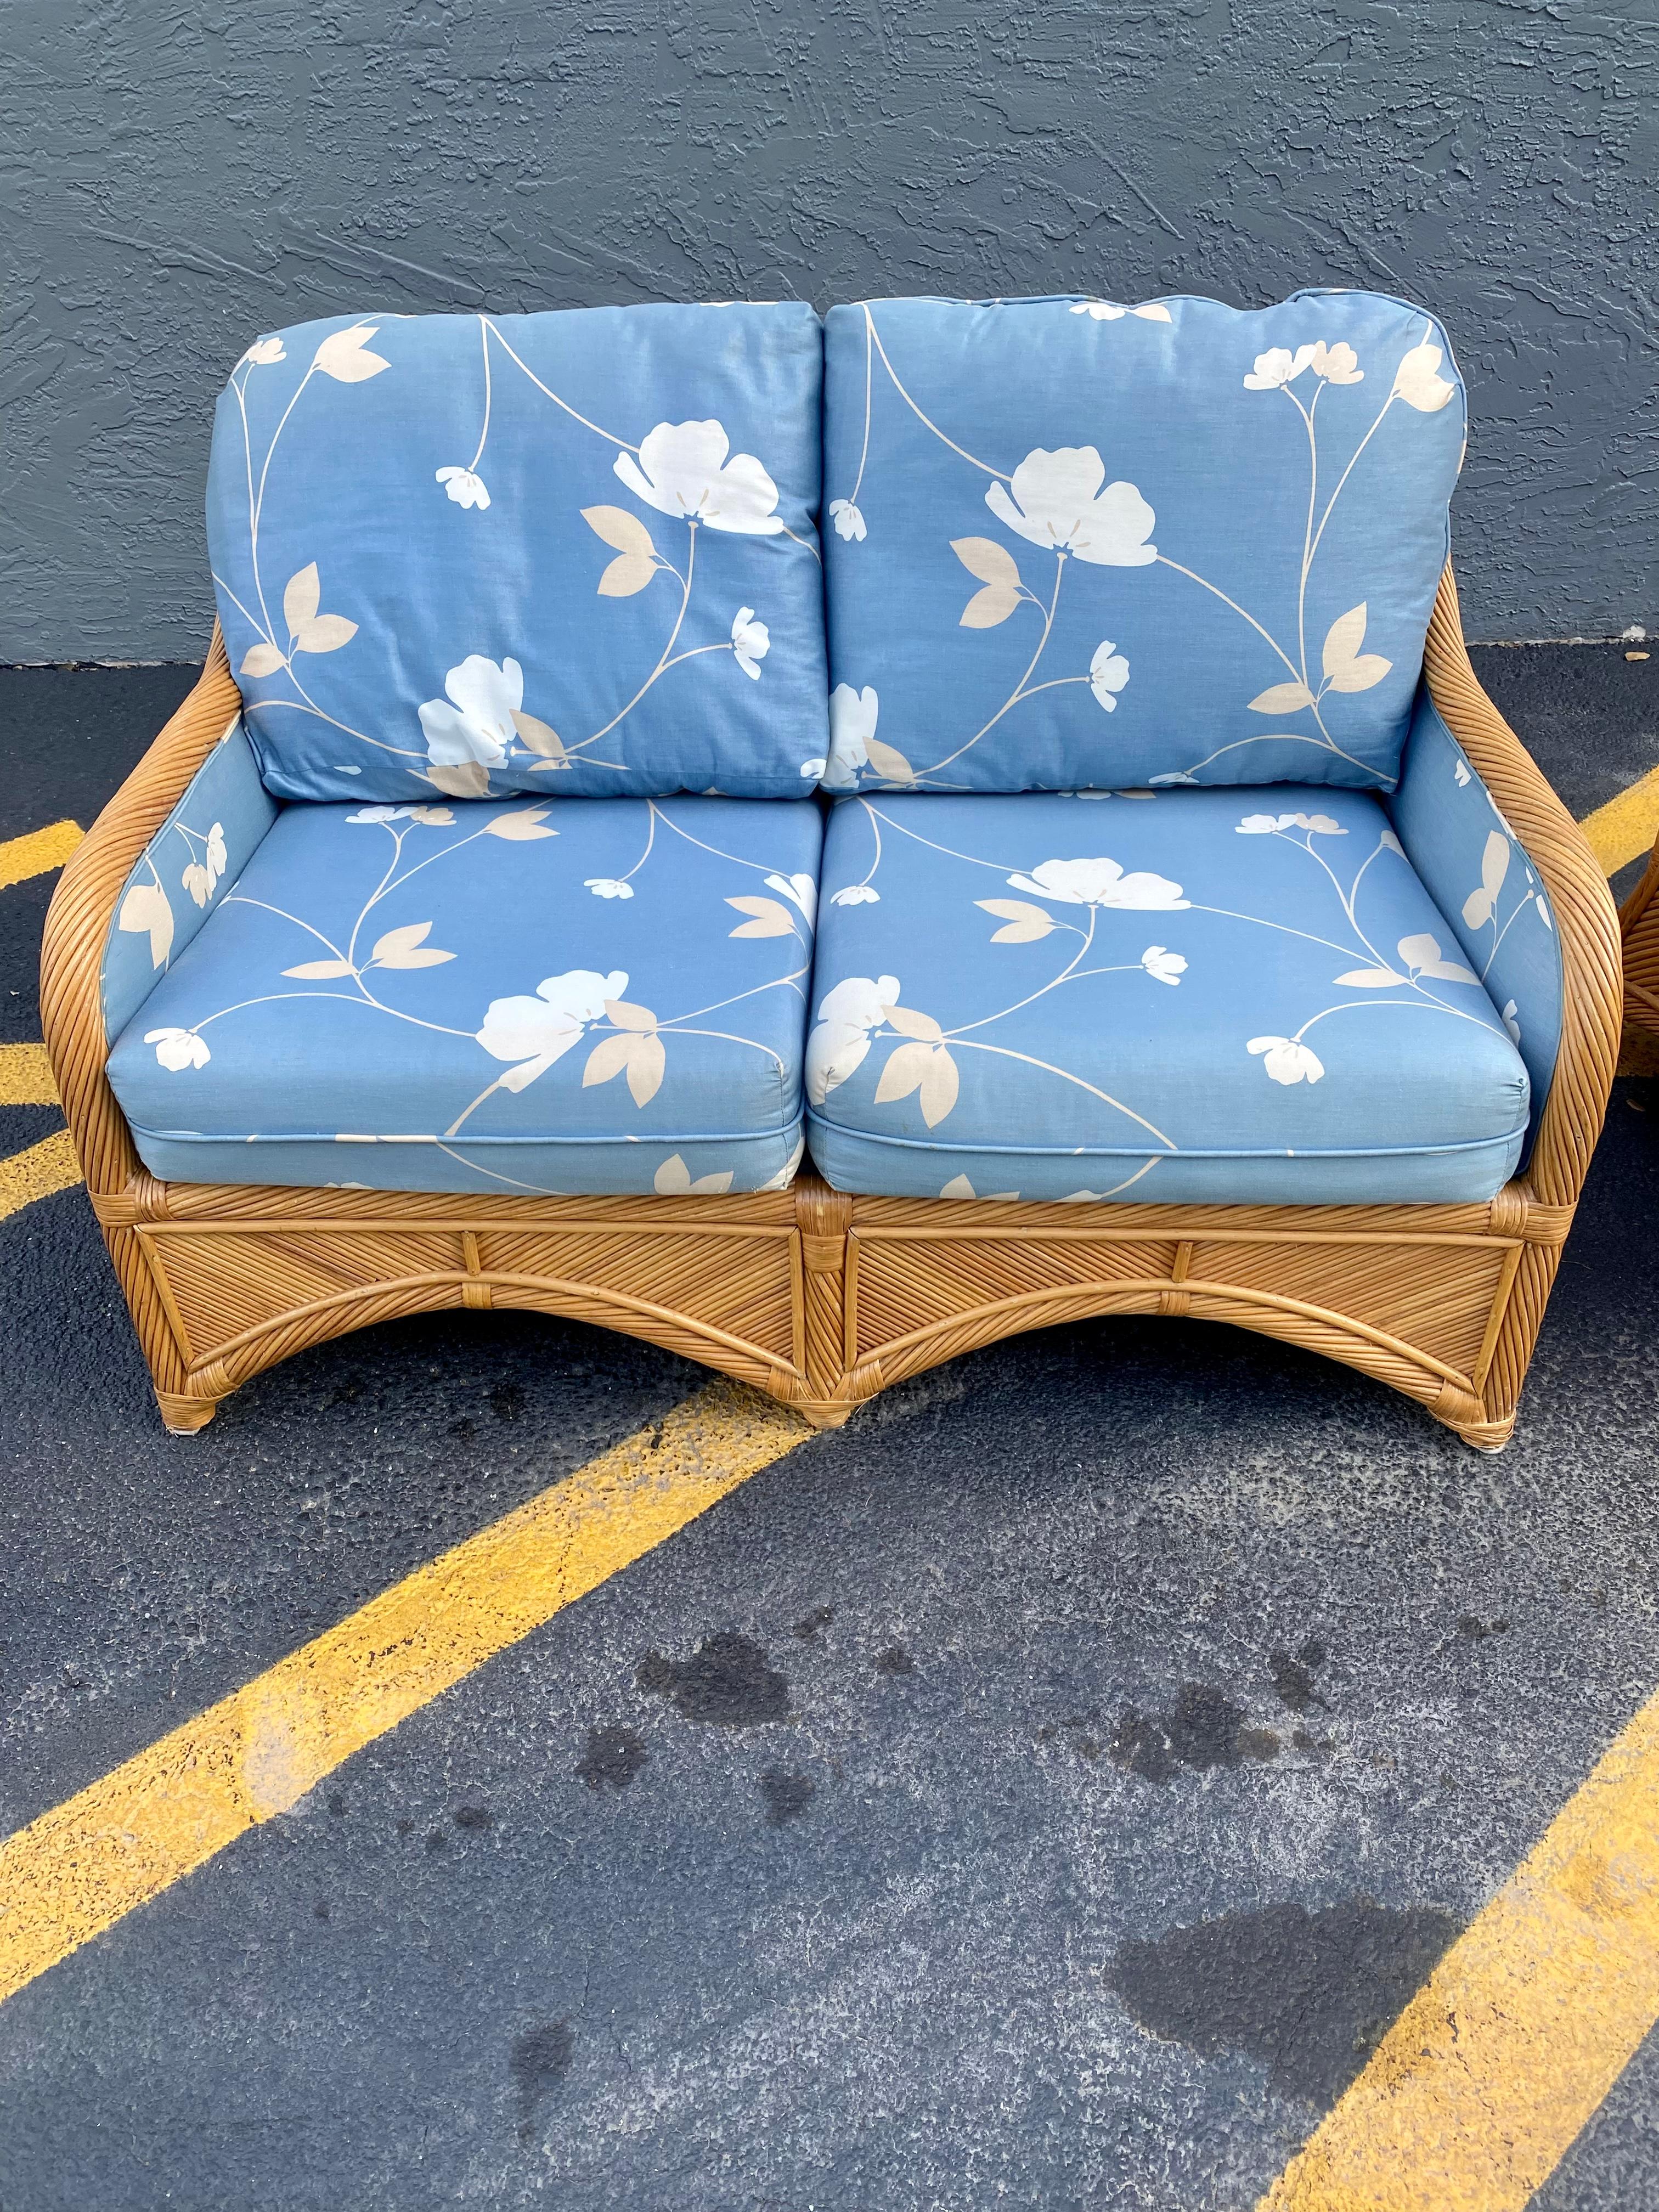 1970s Rattan Reed Sculptural Chinoiserie Style Blue White Sofa Suite, Set of 4 For Sale 4